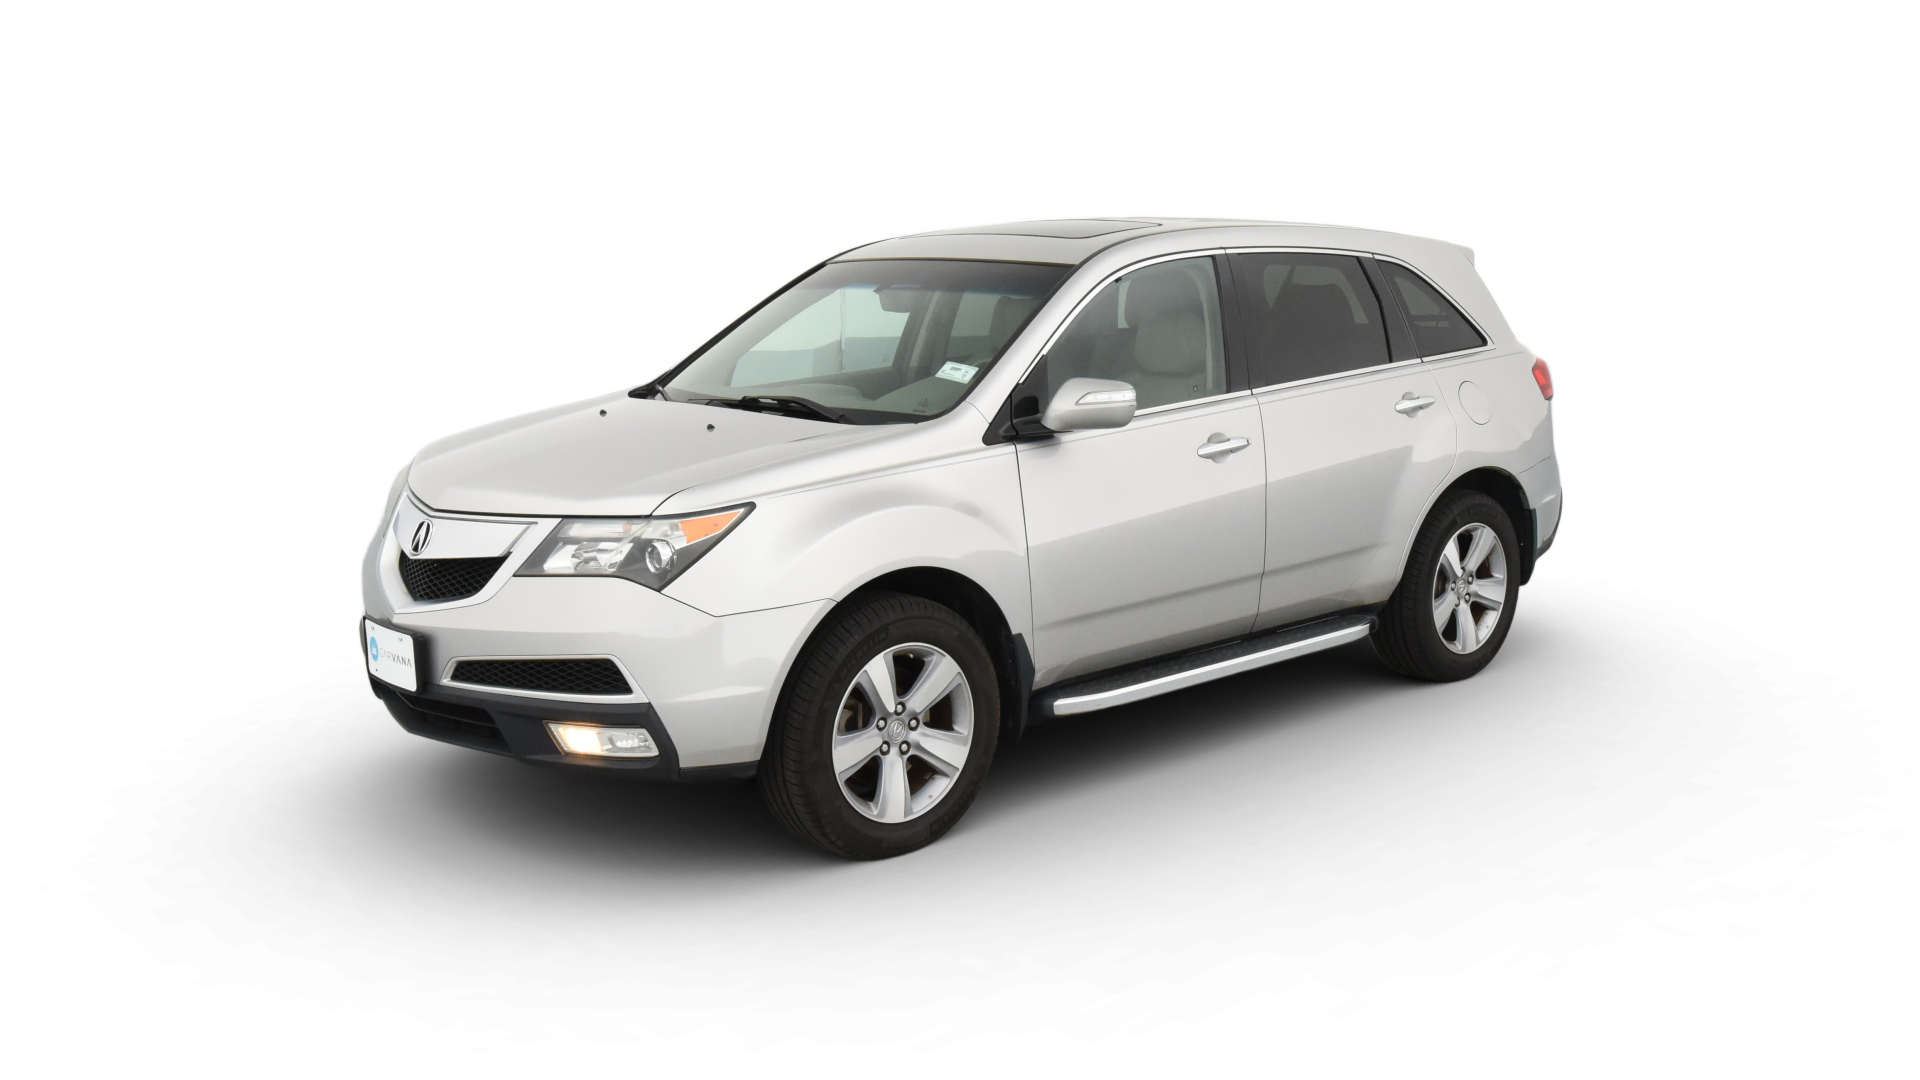 Used 2013 Acura MDX For Sale Online | Carvana